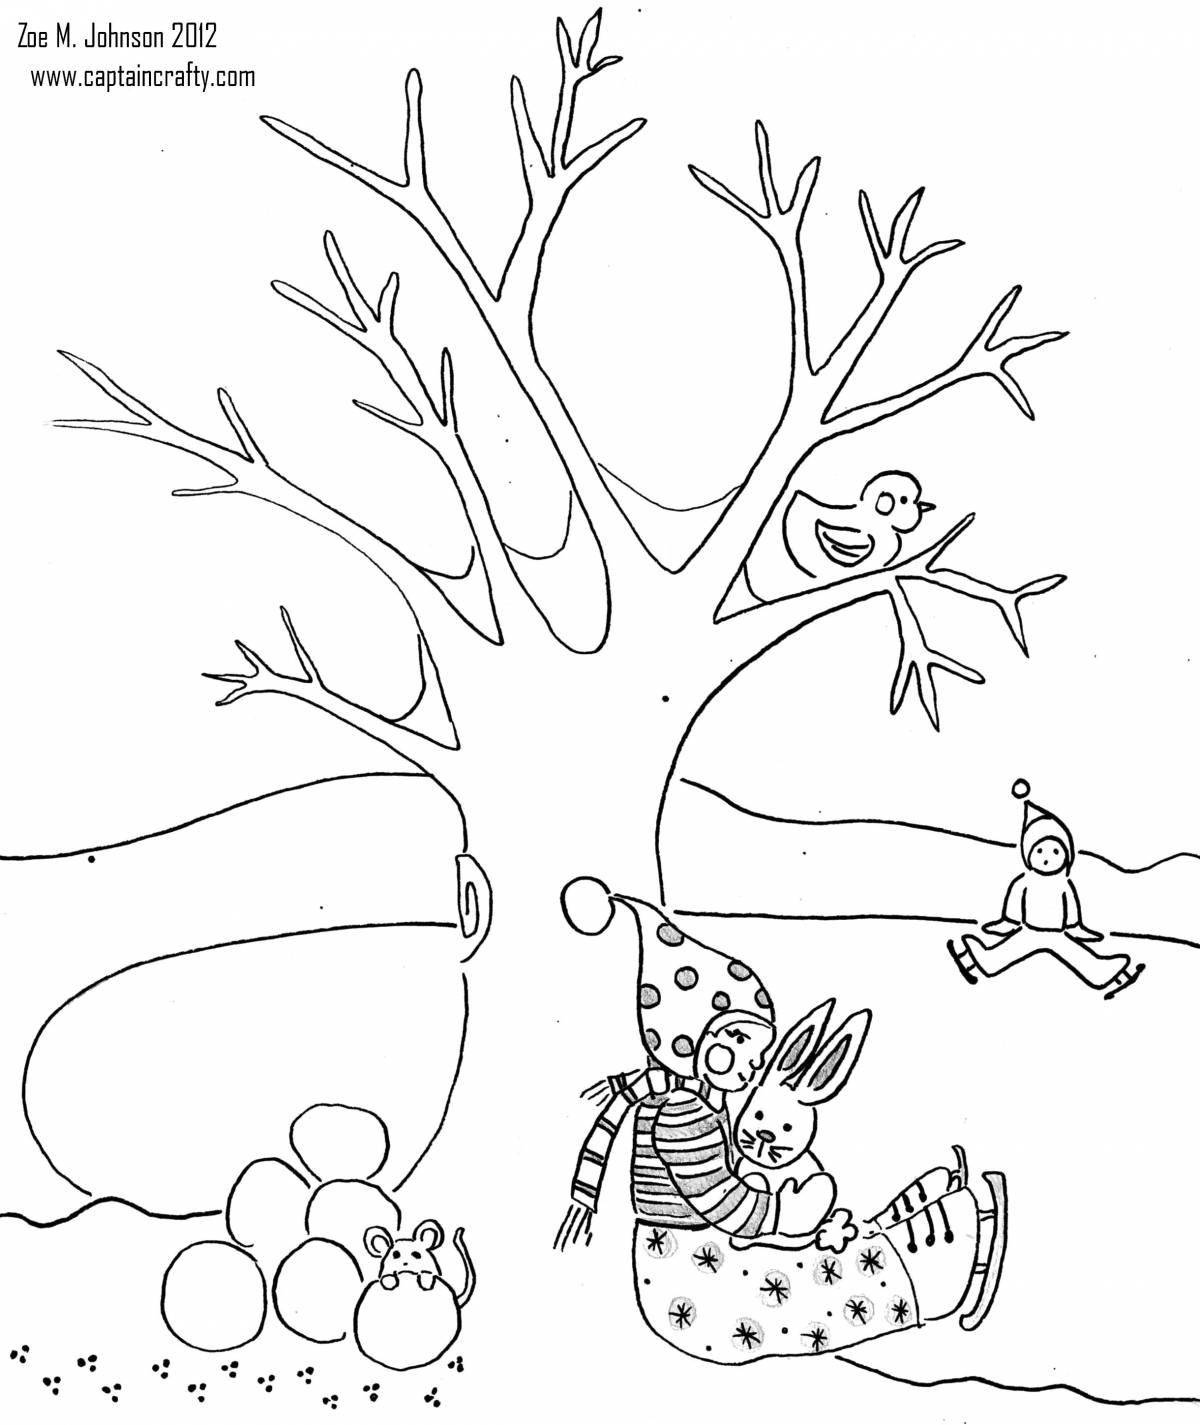 Coloring page serendipitous plants in winter